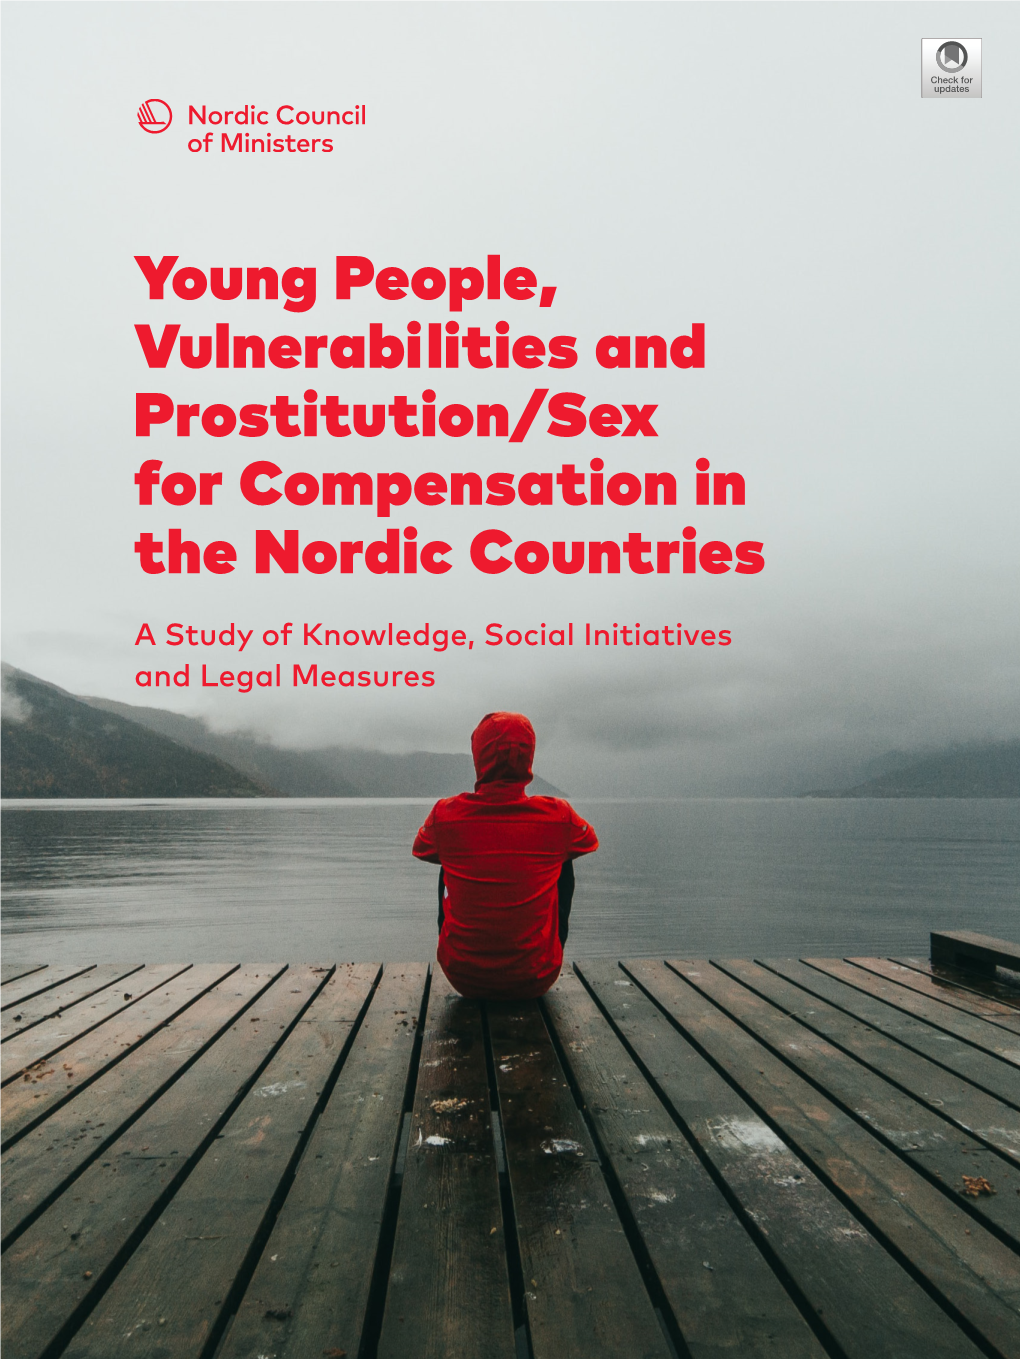 Young People, Vulnerabilities and Prostitution/Sex for Compensation in the Nordic Countries